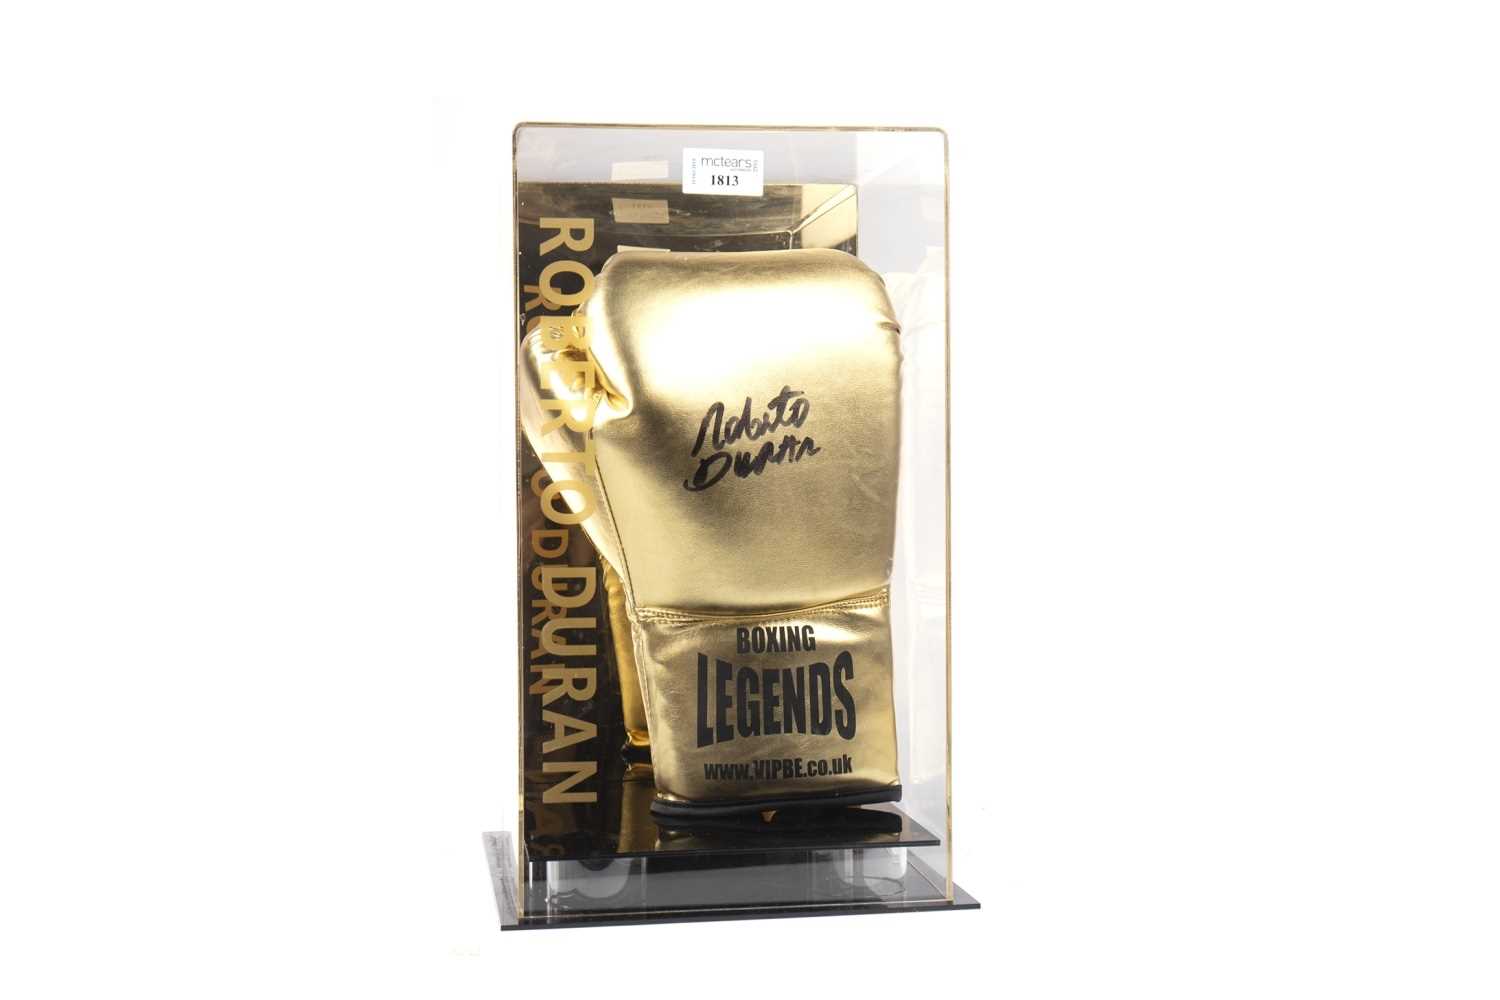 Lot 1813 - A GOLD BOXING GLOVE SIGNED BY ROBERTO DURAN